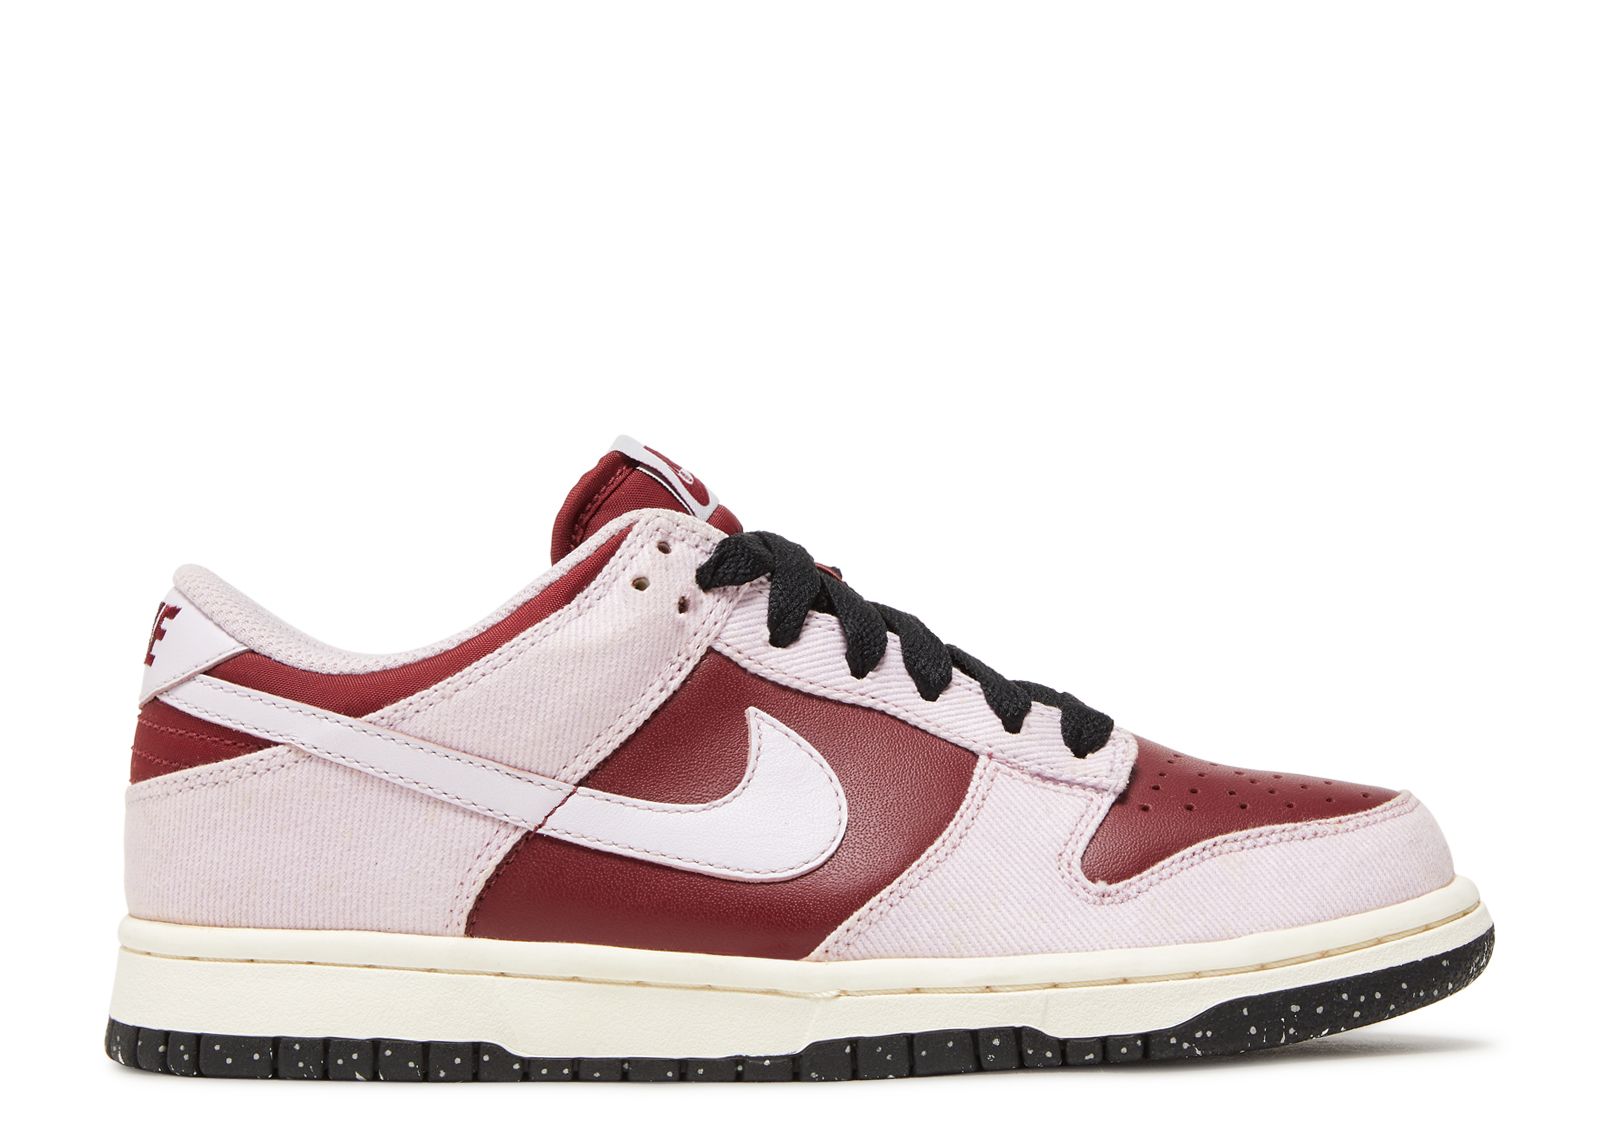 W'S Dunk Low Cl - Nike - 317815 651 - team red/doll-black-sail 